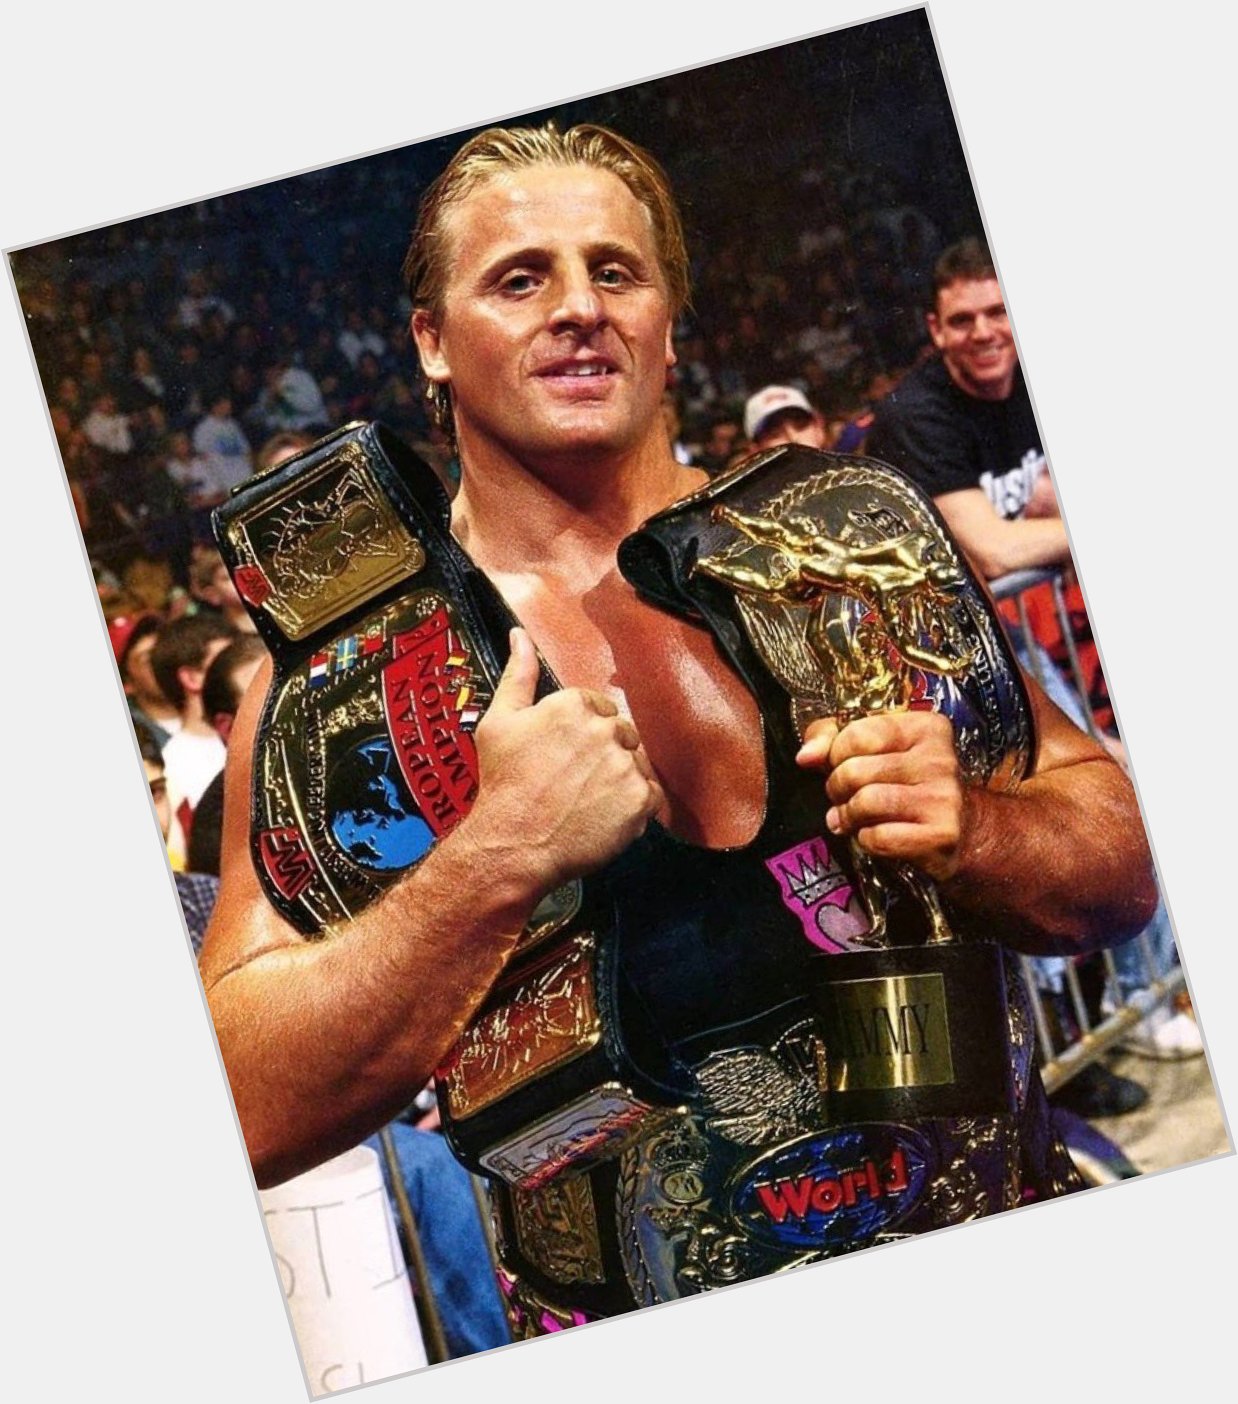 Happy Heavenly birthday to the greatest member of the Hart. Wrestling family the rocket the King of Harts Owen Hart 